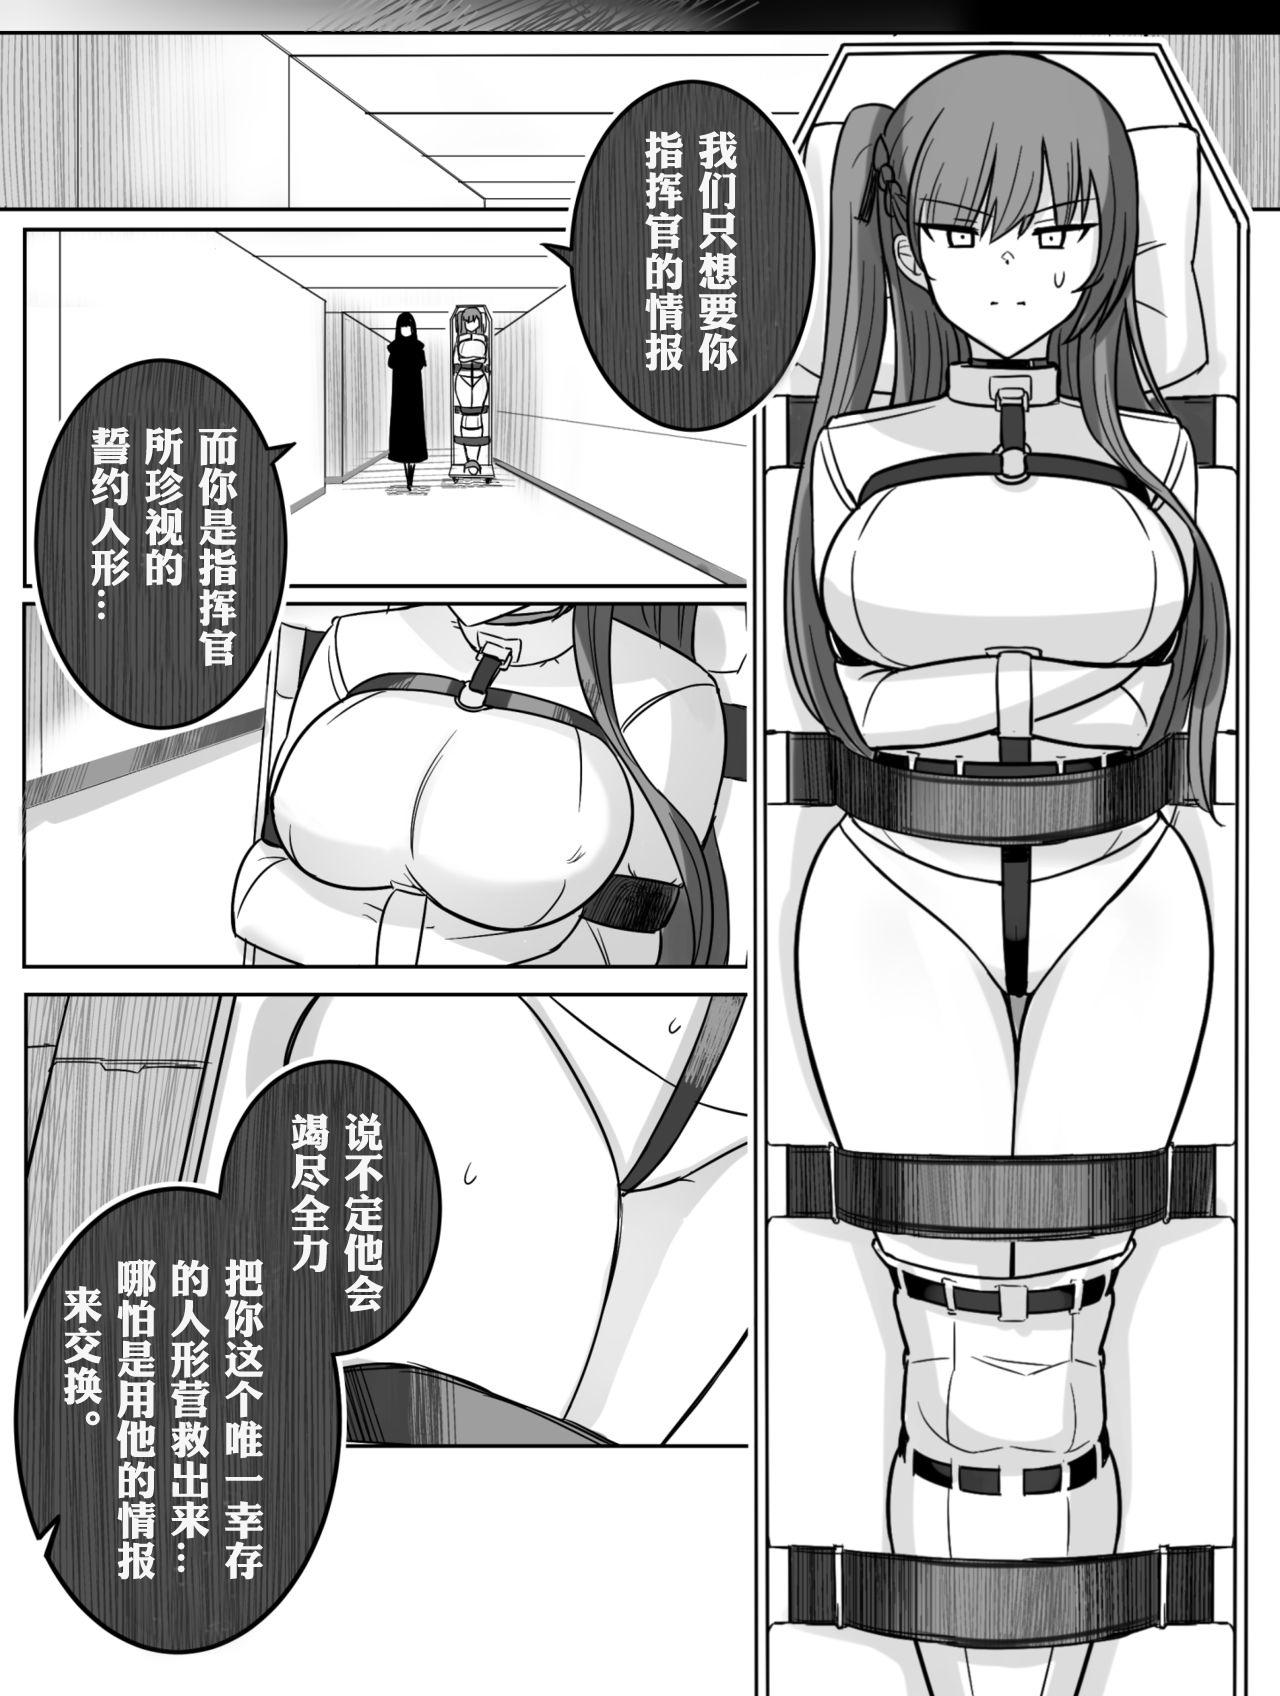 Parties Lost Dolls - Girls frontline Gape - Page 5